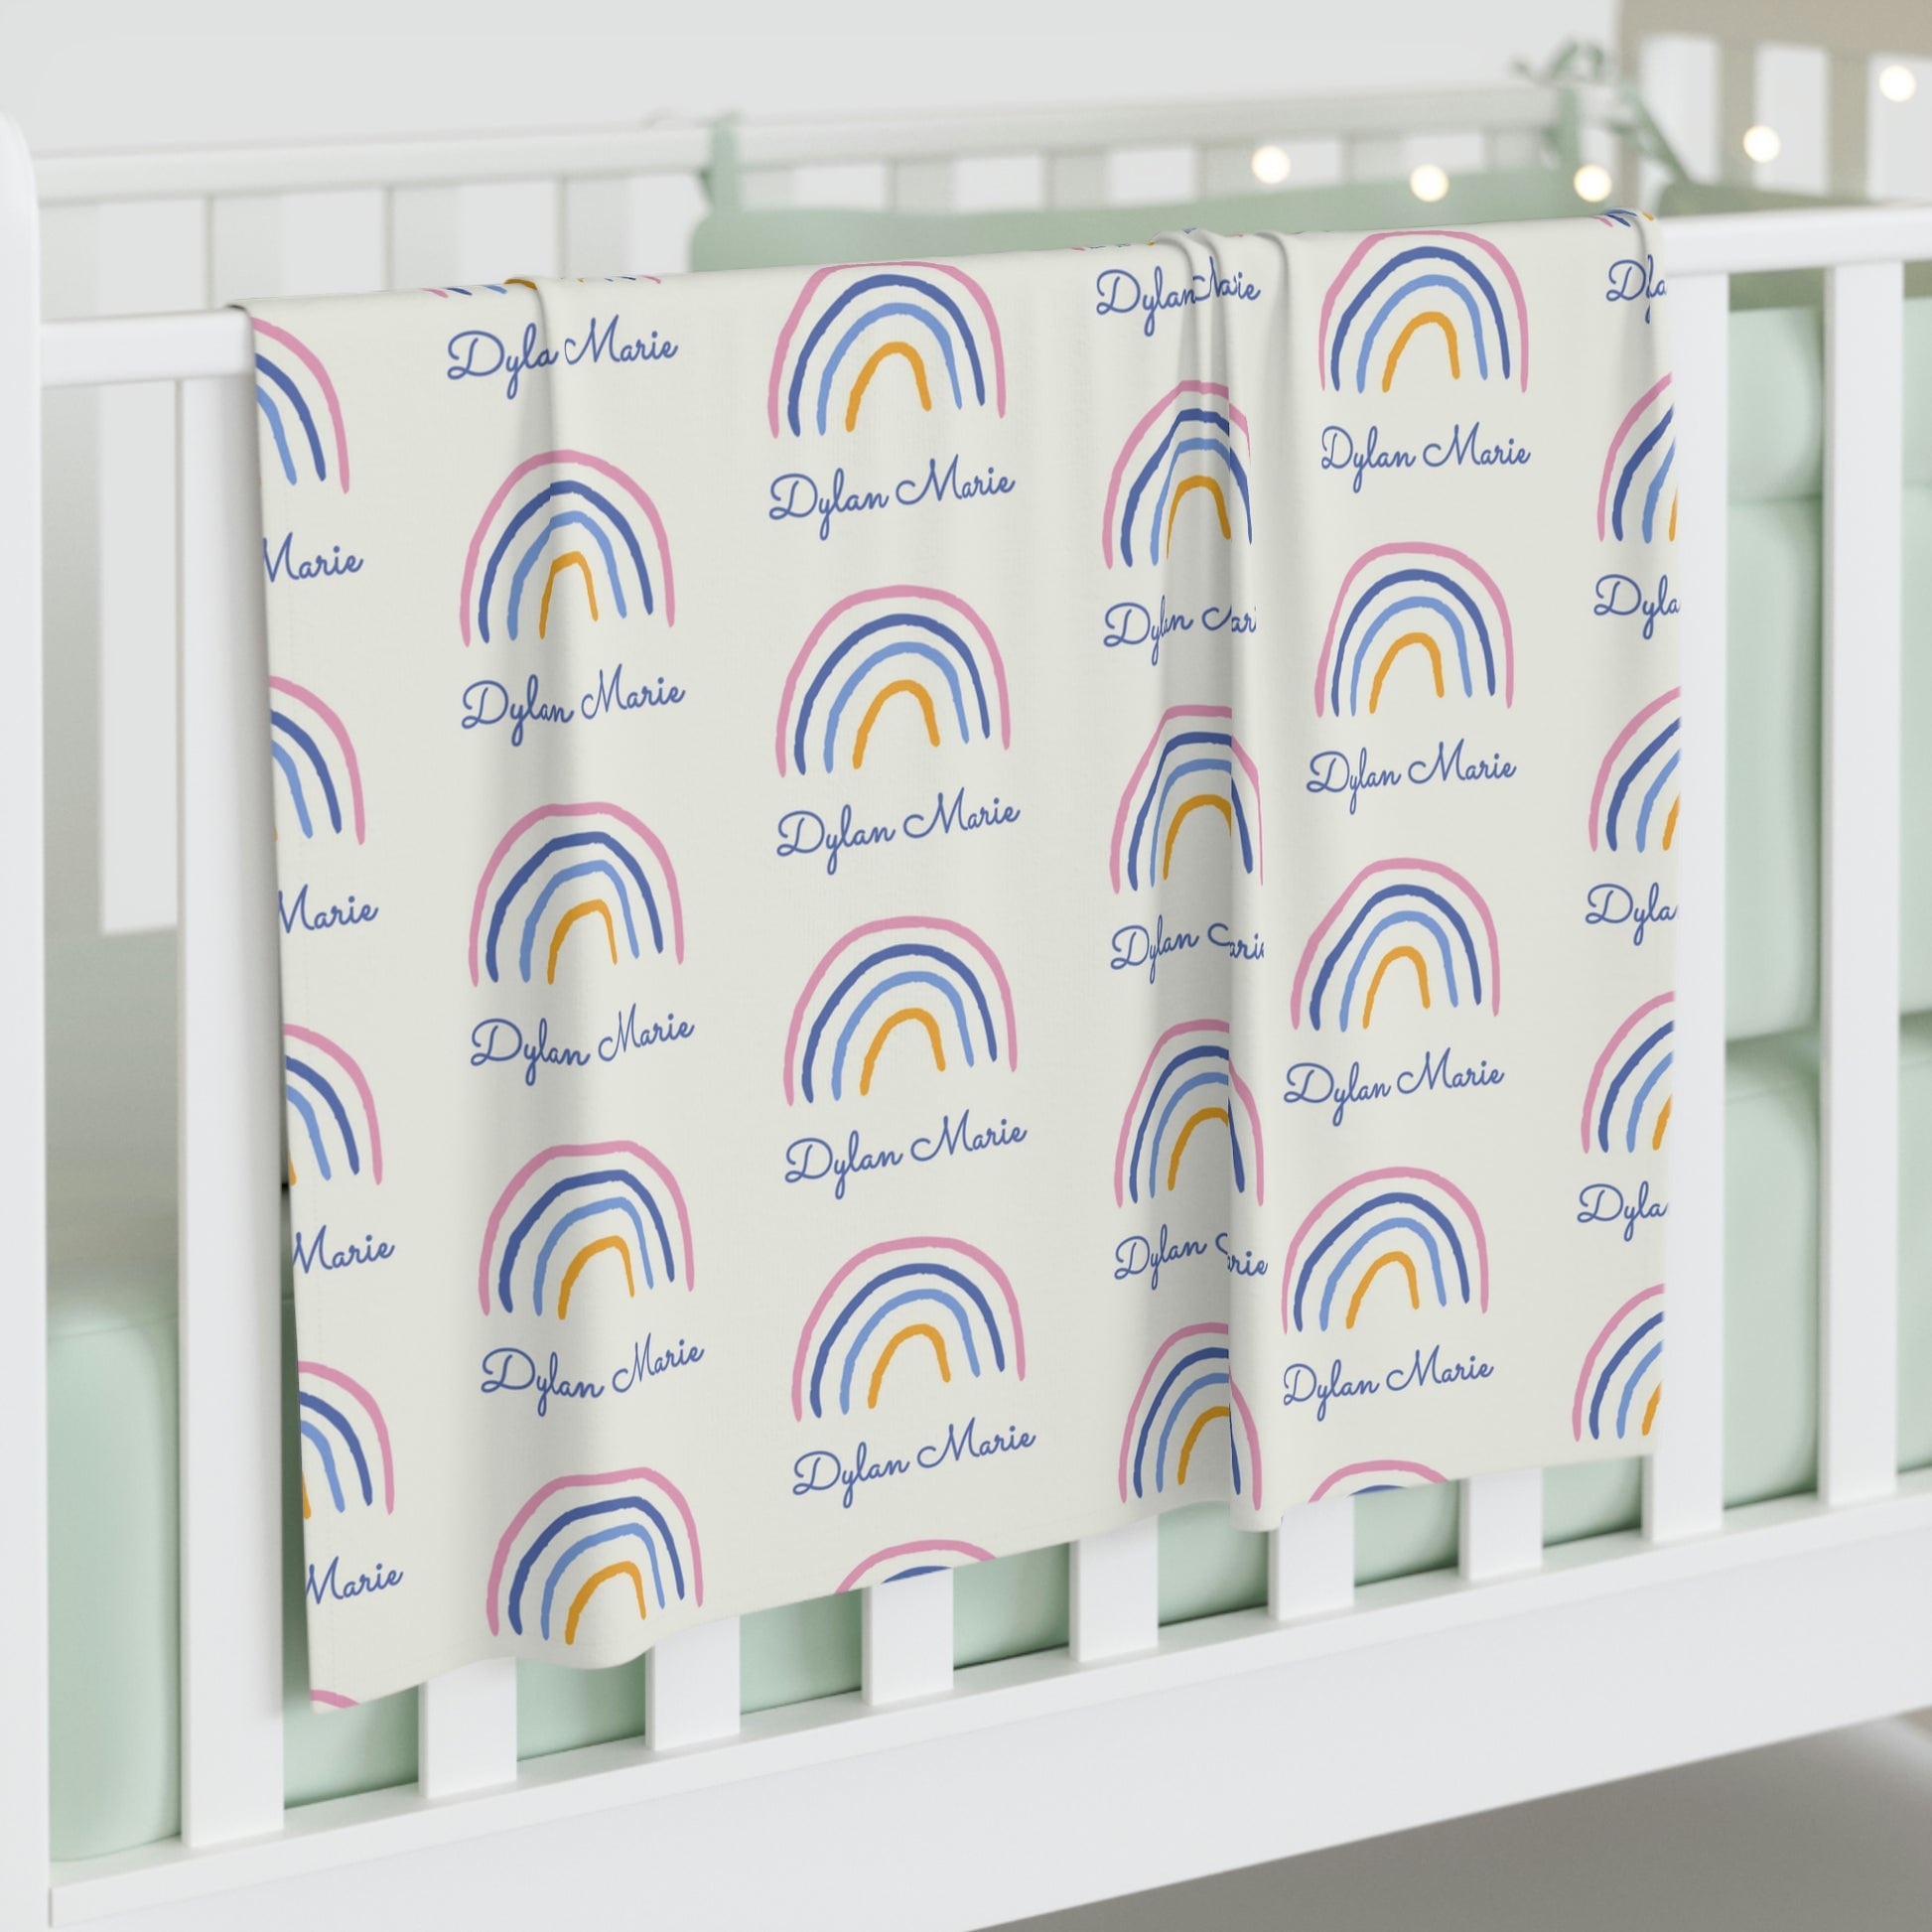 Jersey personalized baby blanket in rainbow pattern hung over side of white crib